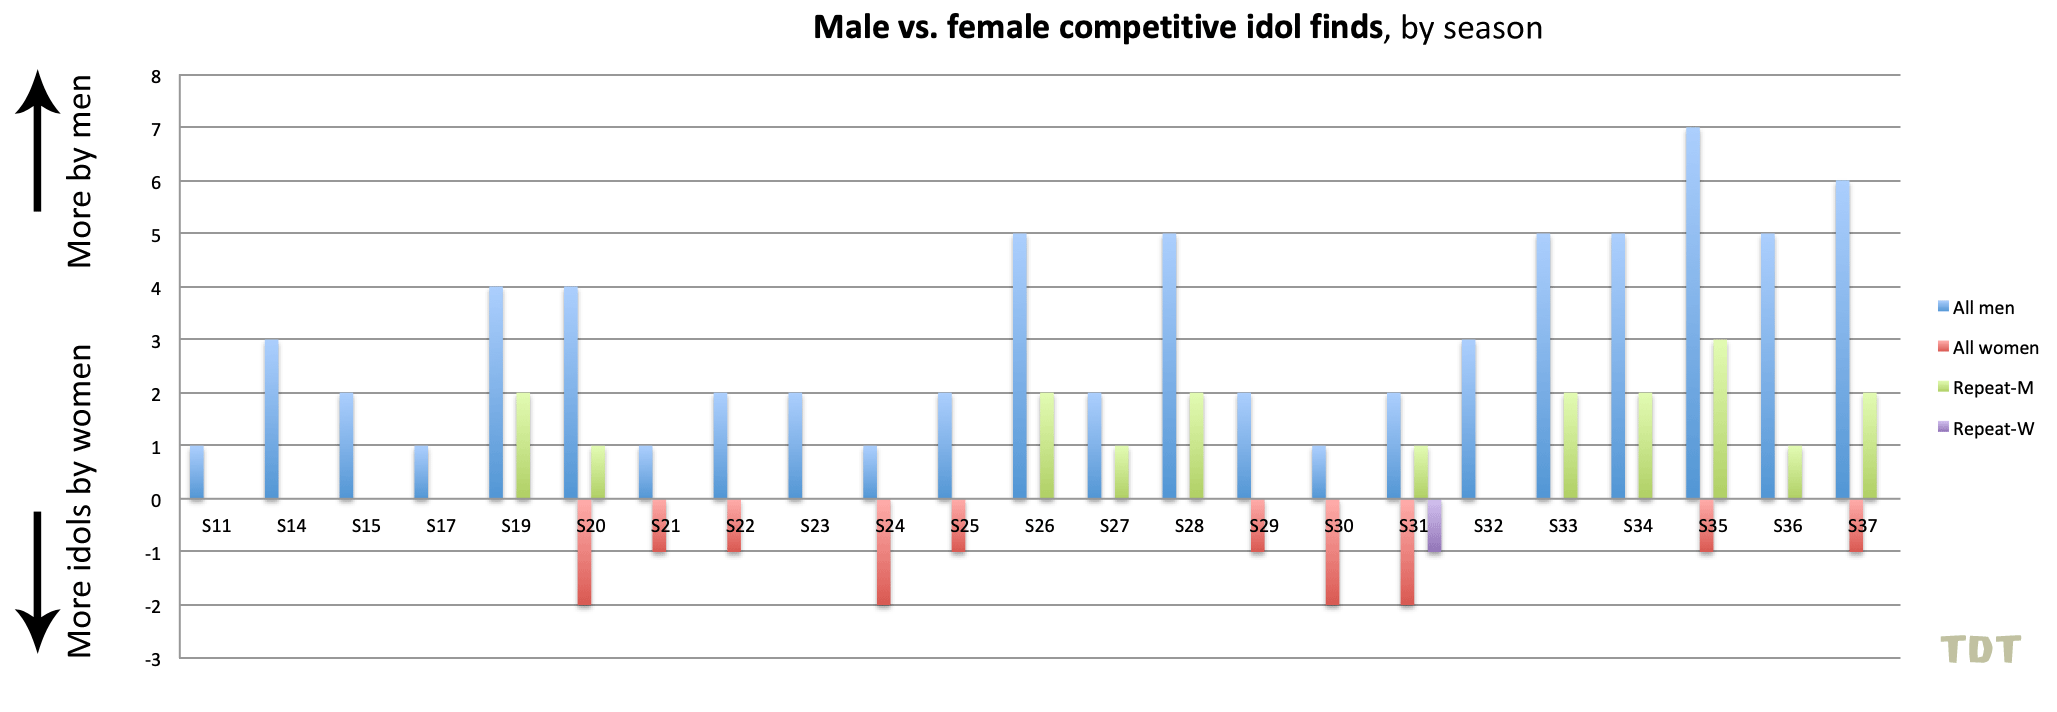 History of total and repeat idol finds, by gender